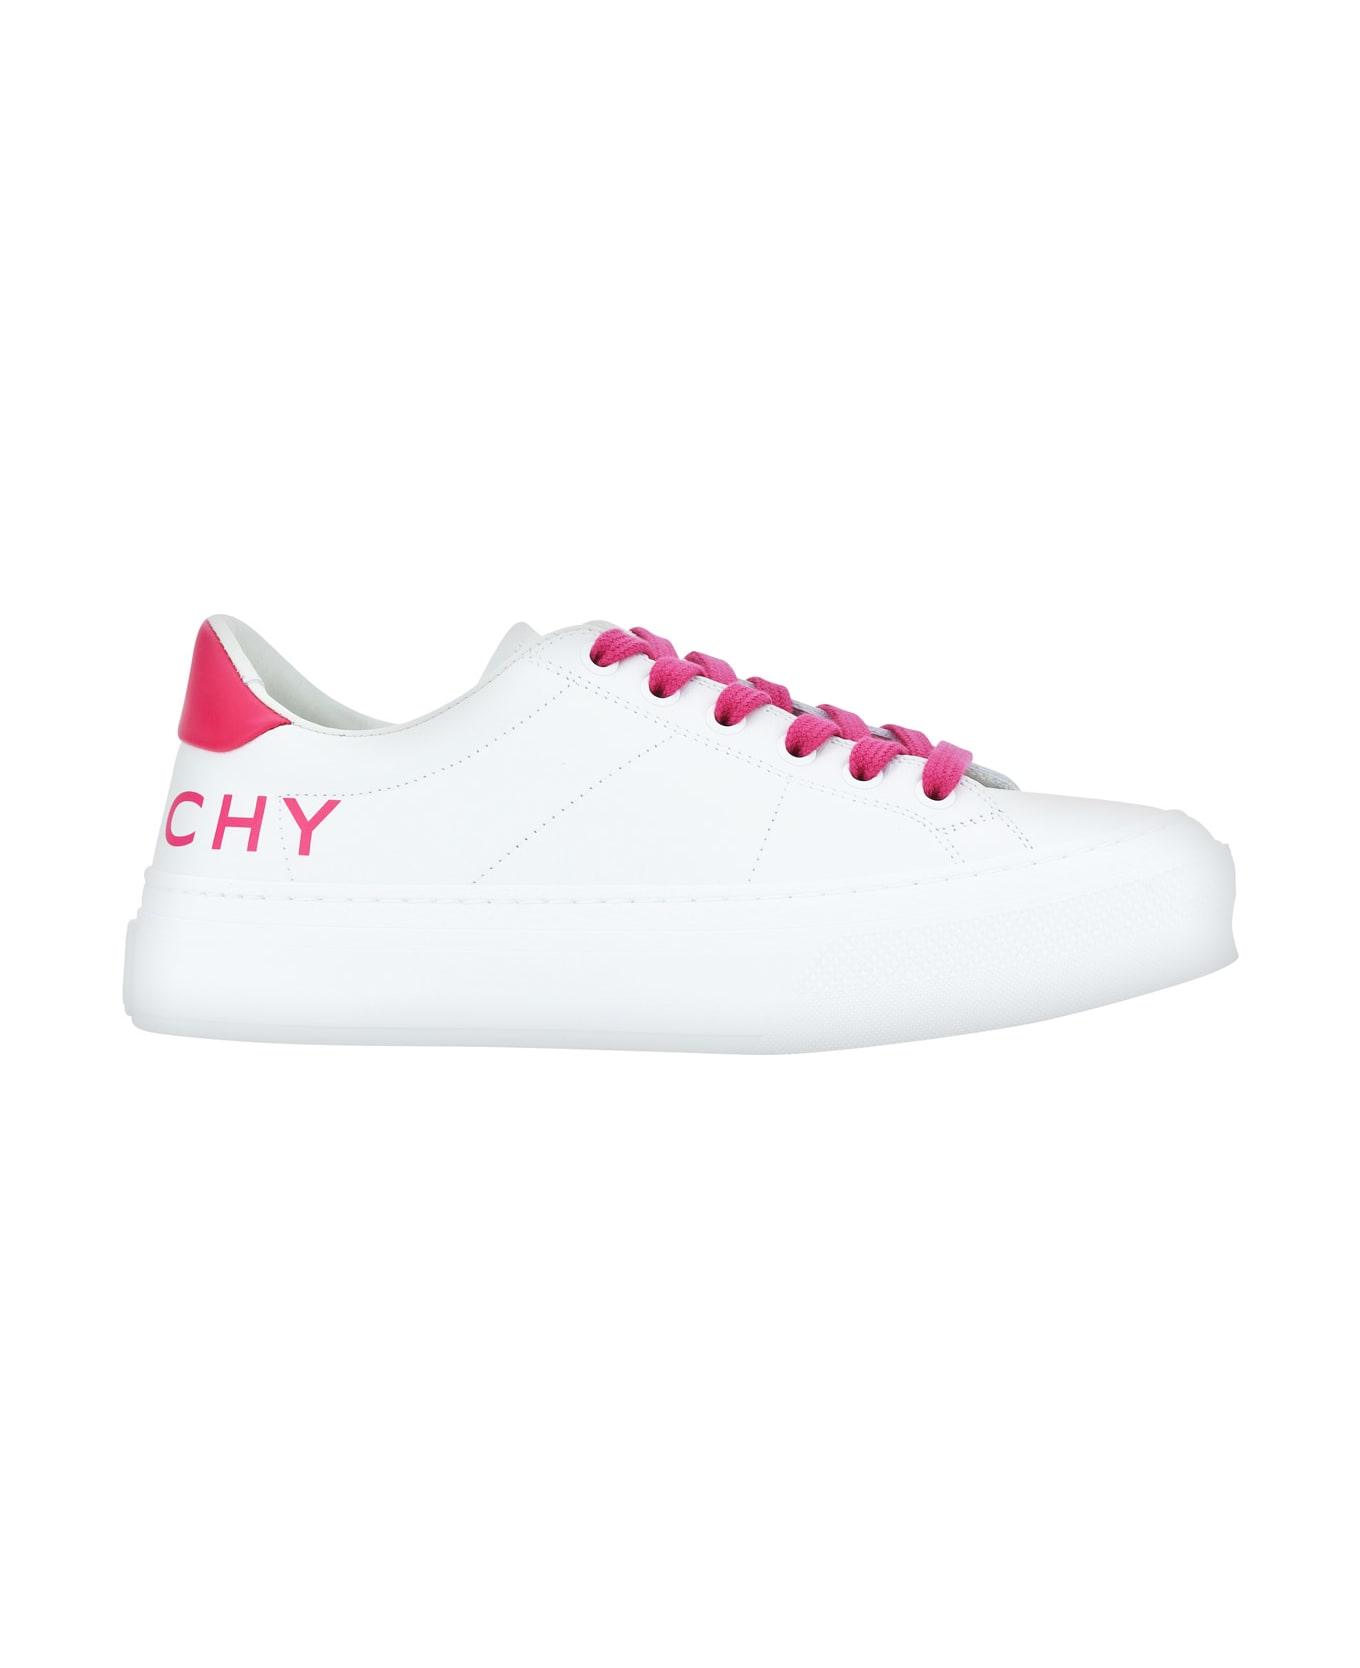 Givenchy City Sport Sneakers In White/neon Pink Leather - White/pink